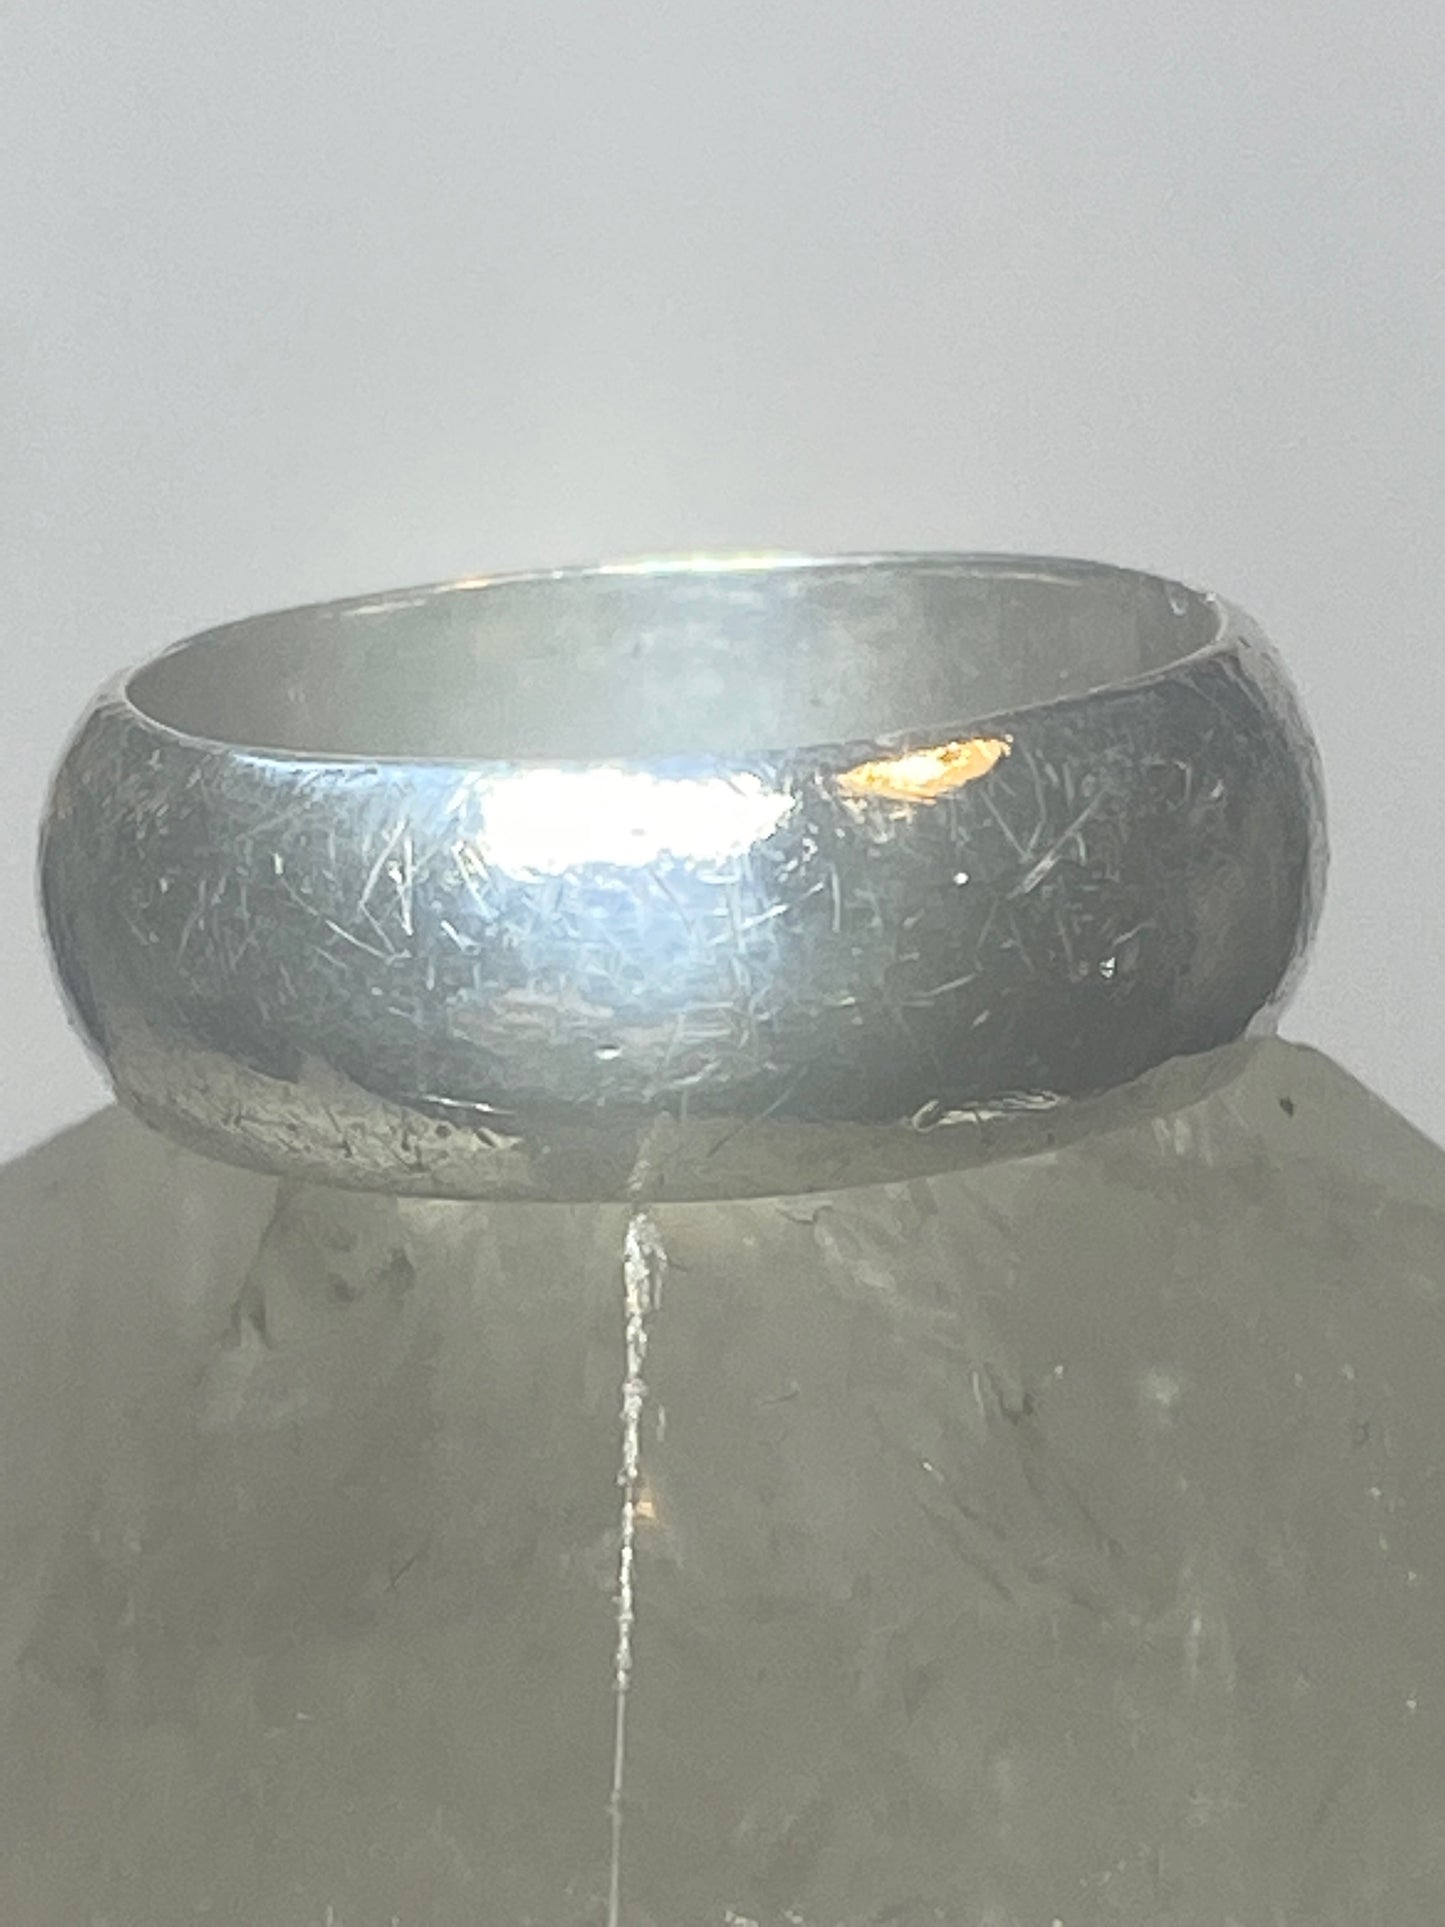 Plain ring wide wedding band size 6.50 sterling silver  X